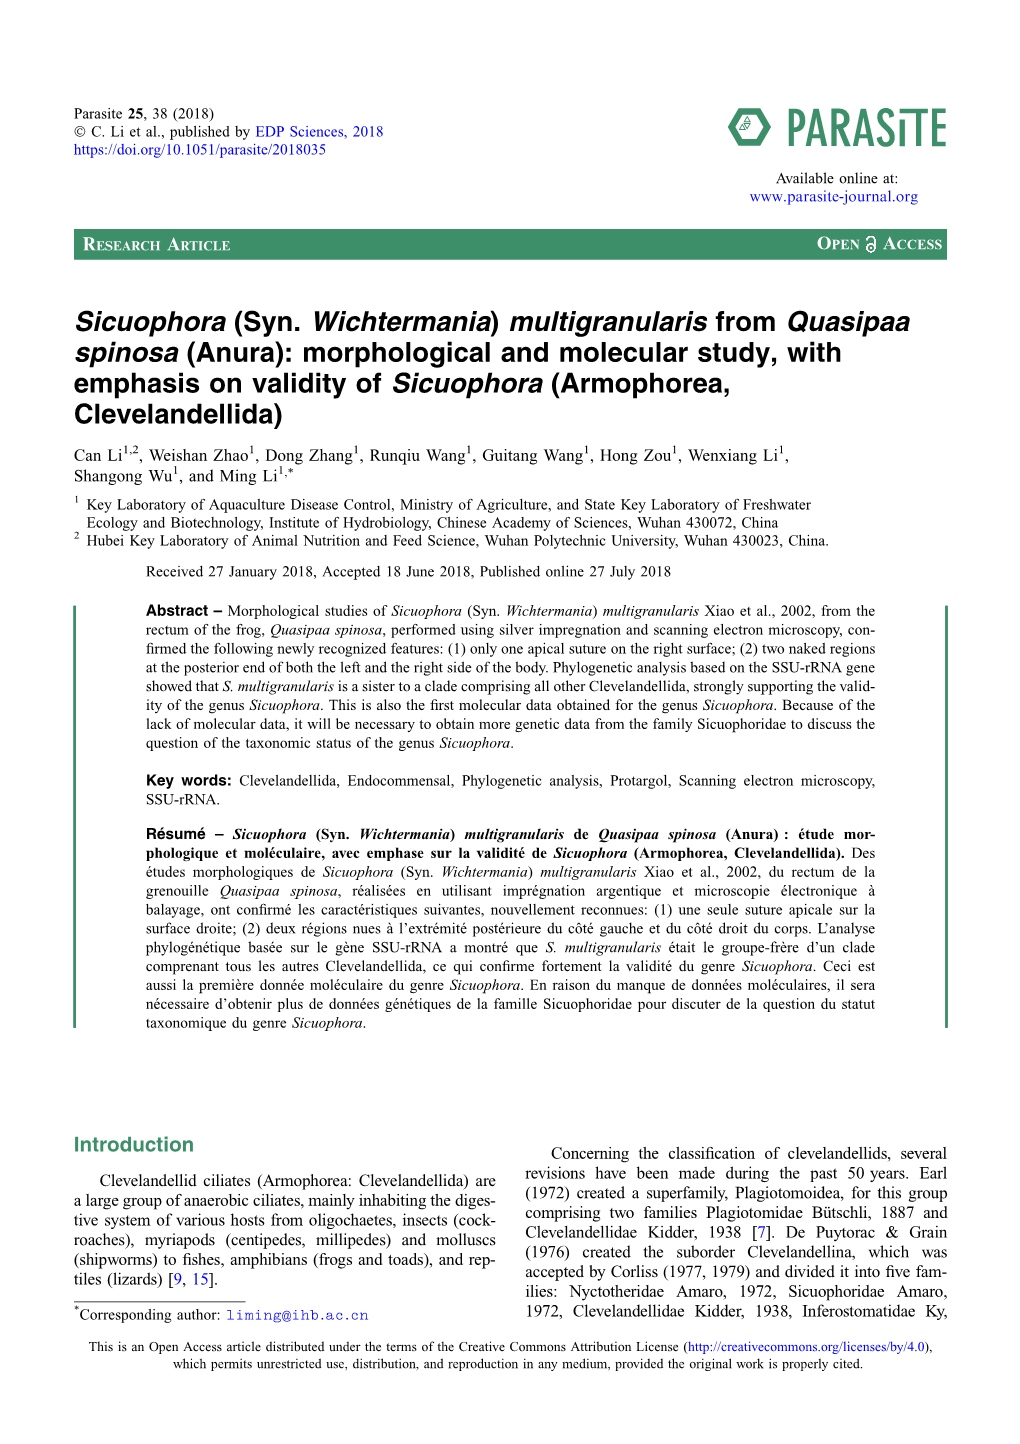 Multigranularis from Quasipaa Spinosa (Anura): Morphological and Molecular Study, with Emphasis on Validity of Sicuophora (Armophorea, Clevelandellida)